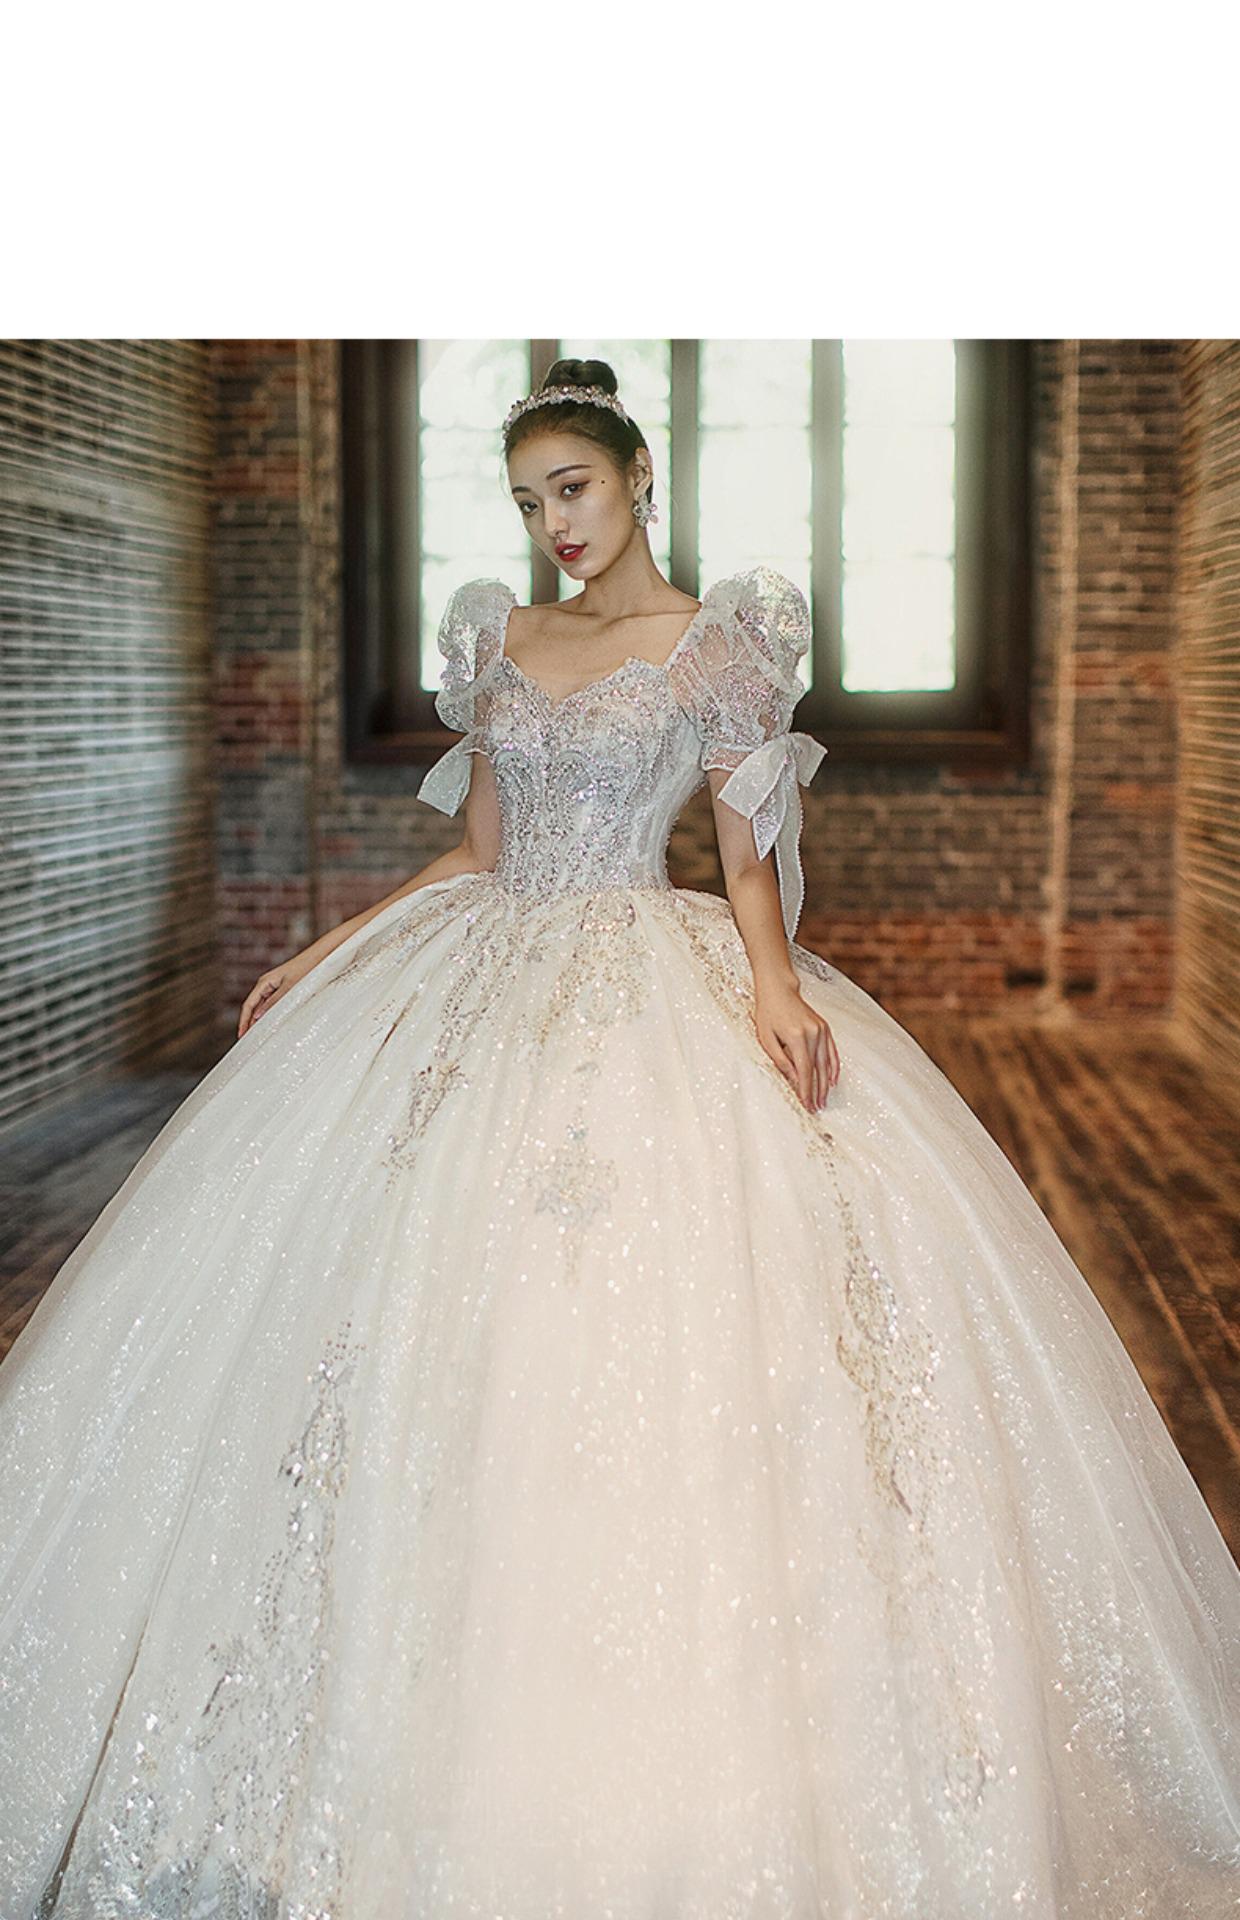 Short Sleeve Embroidered Tulle Ball Gown Wedding Gowns Shinny Princess